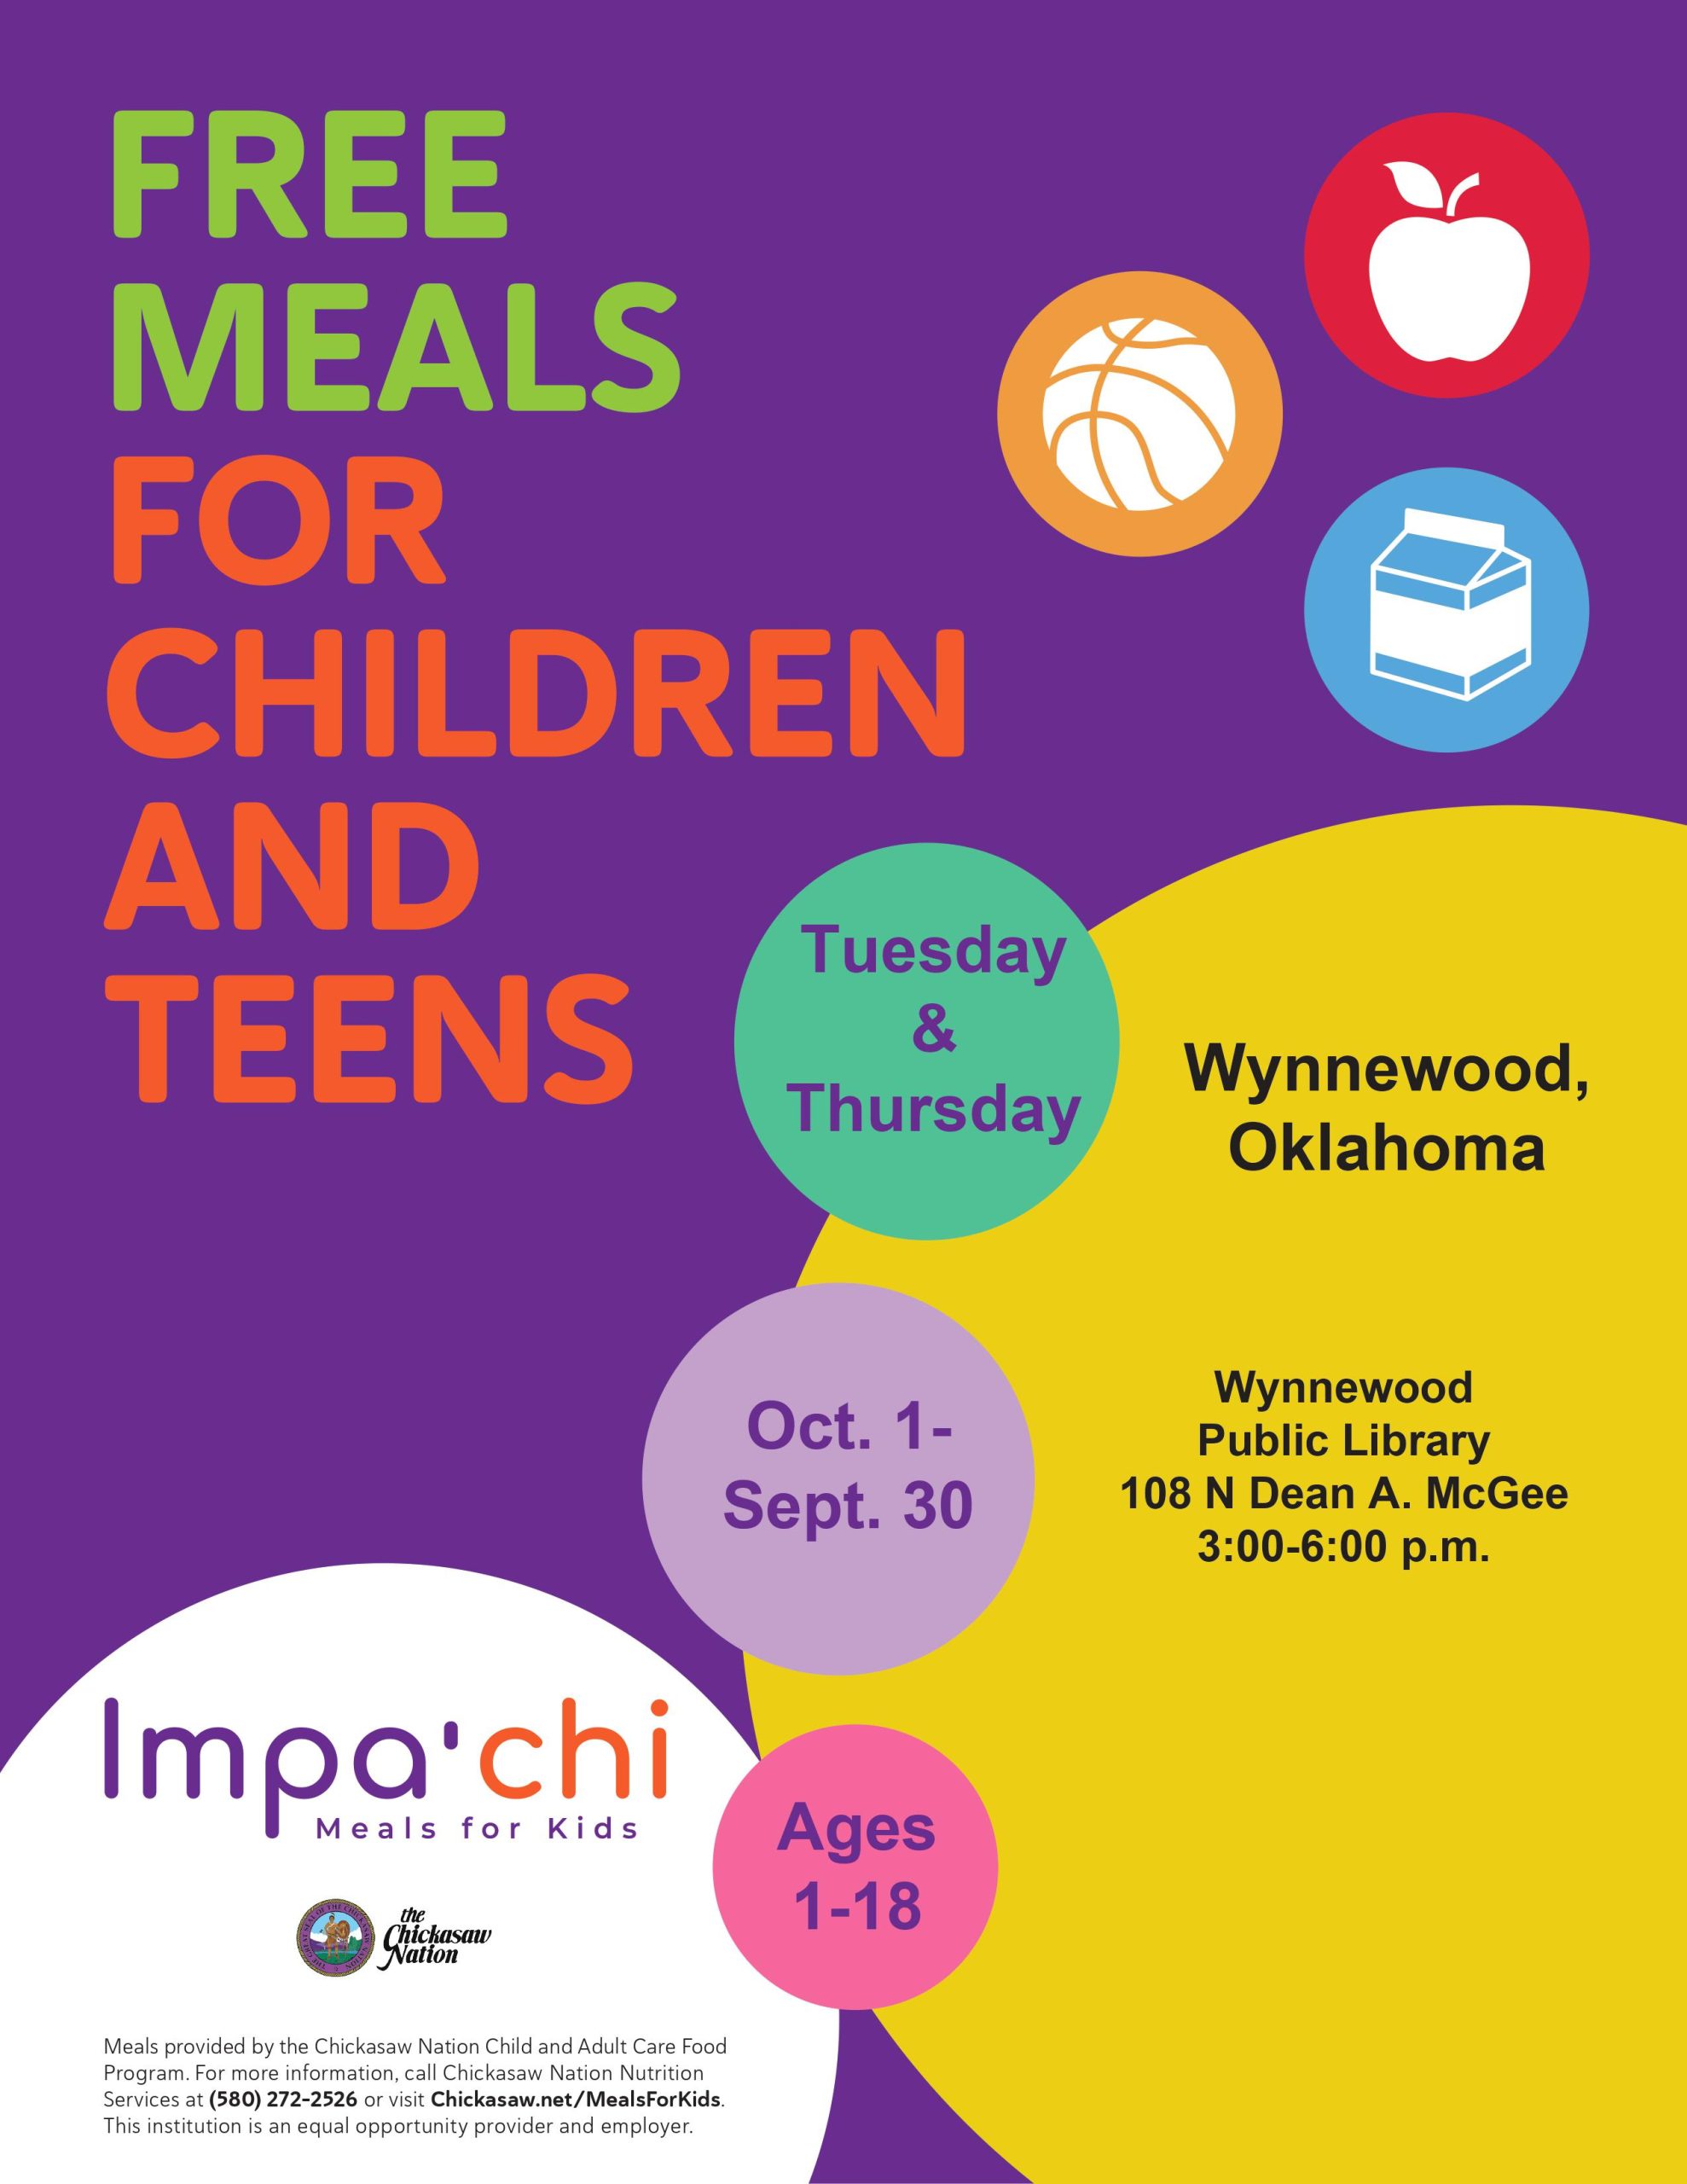 image is a picture of a multi colord flyer for the Impa-chi Meal program offered through the Chickasaw Nation